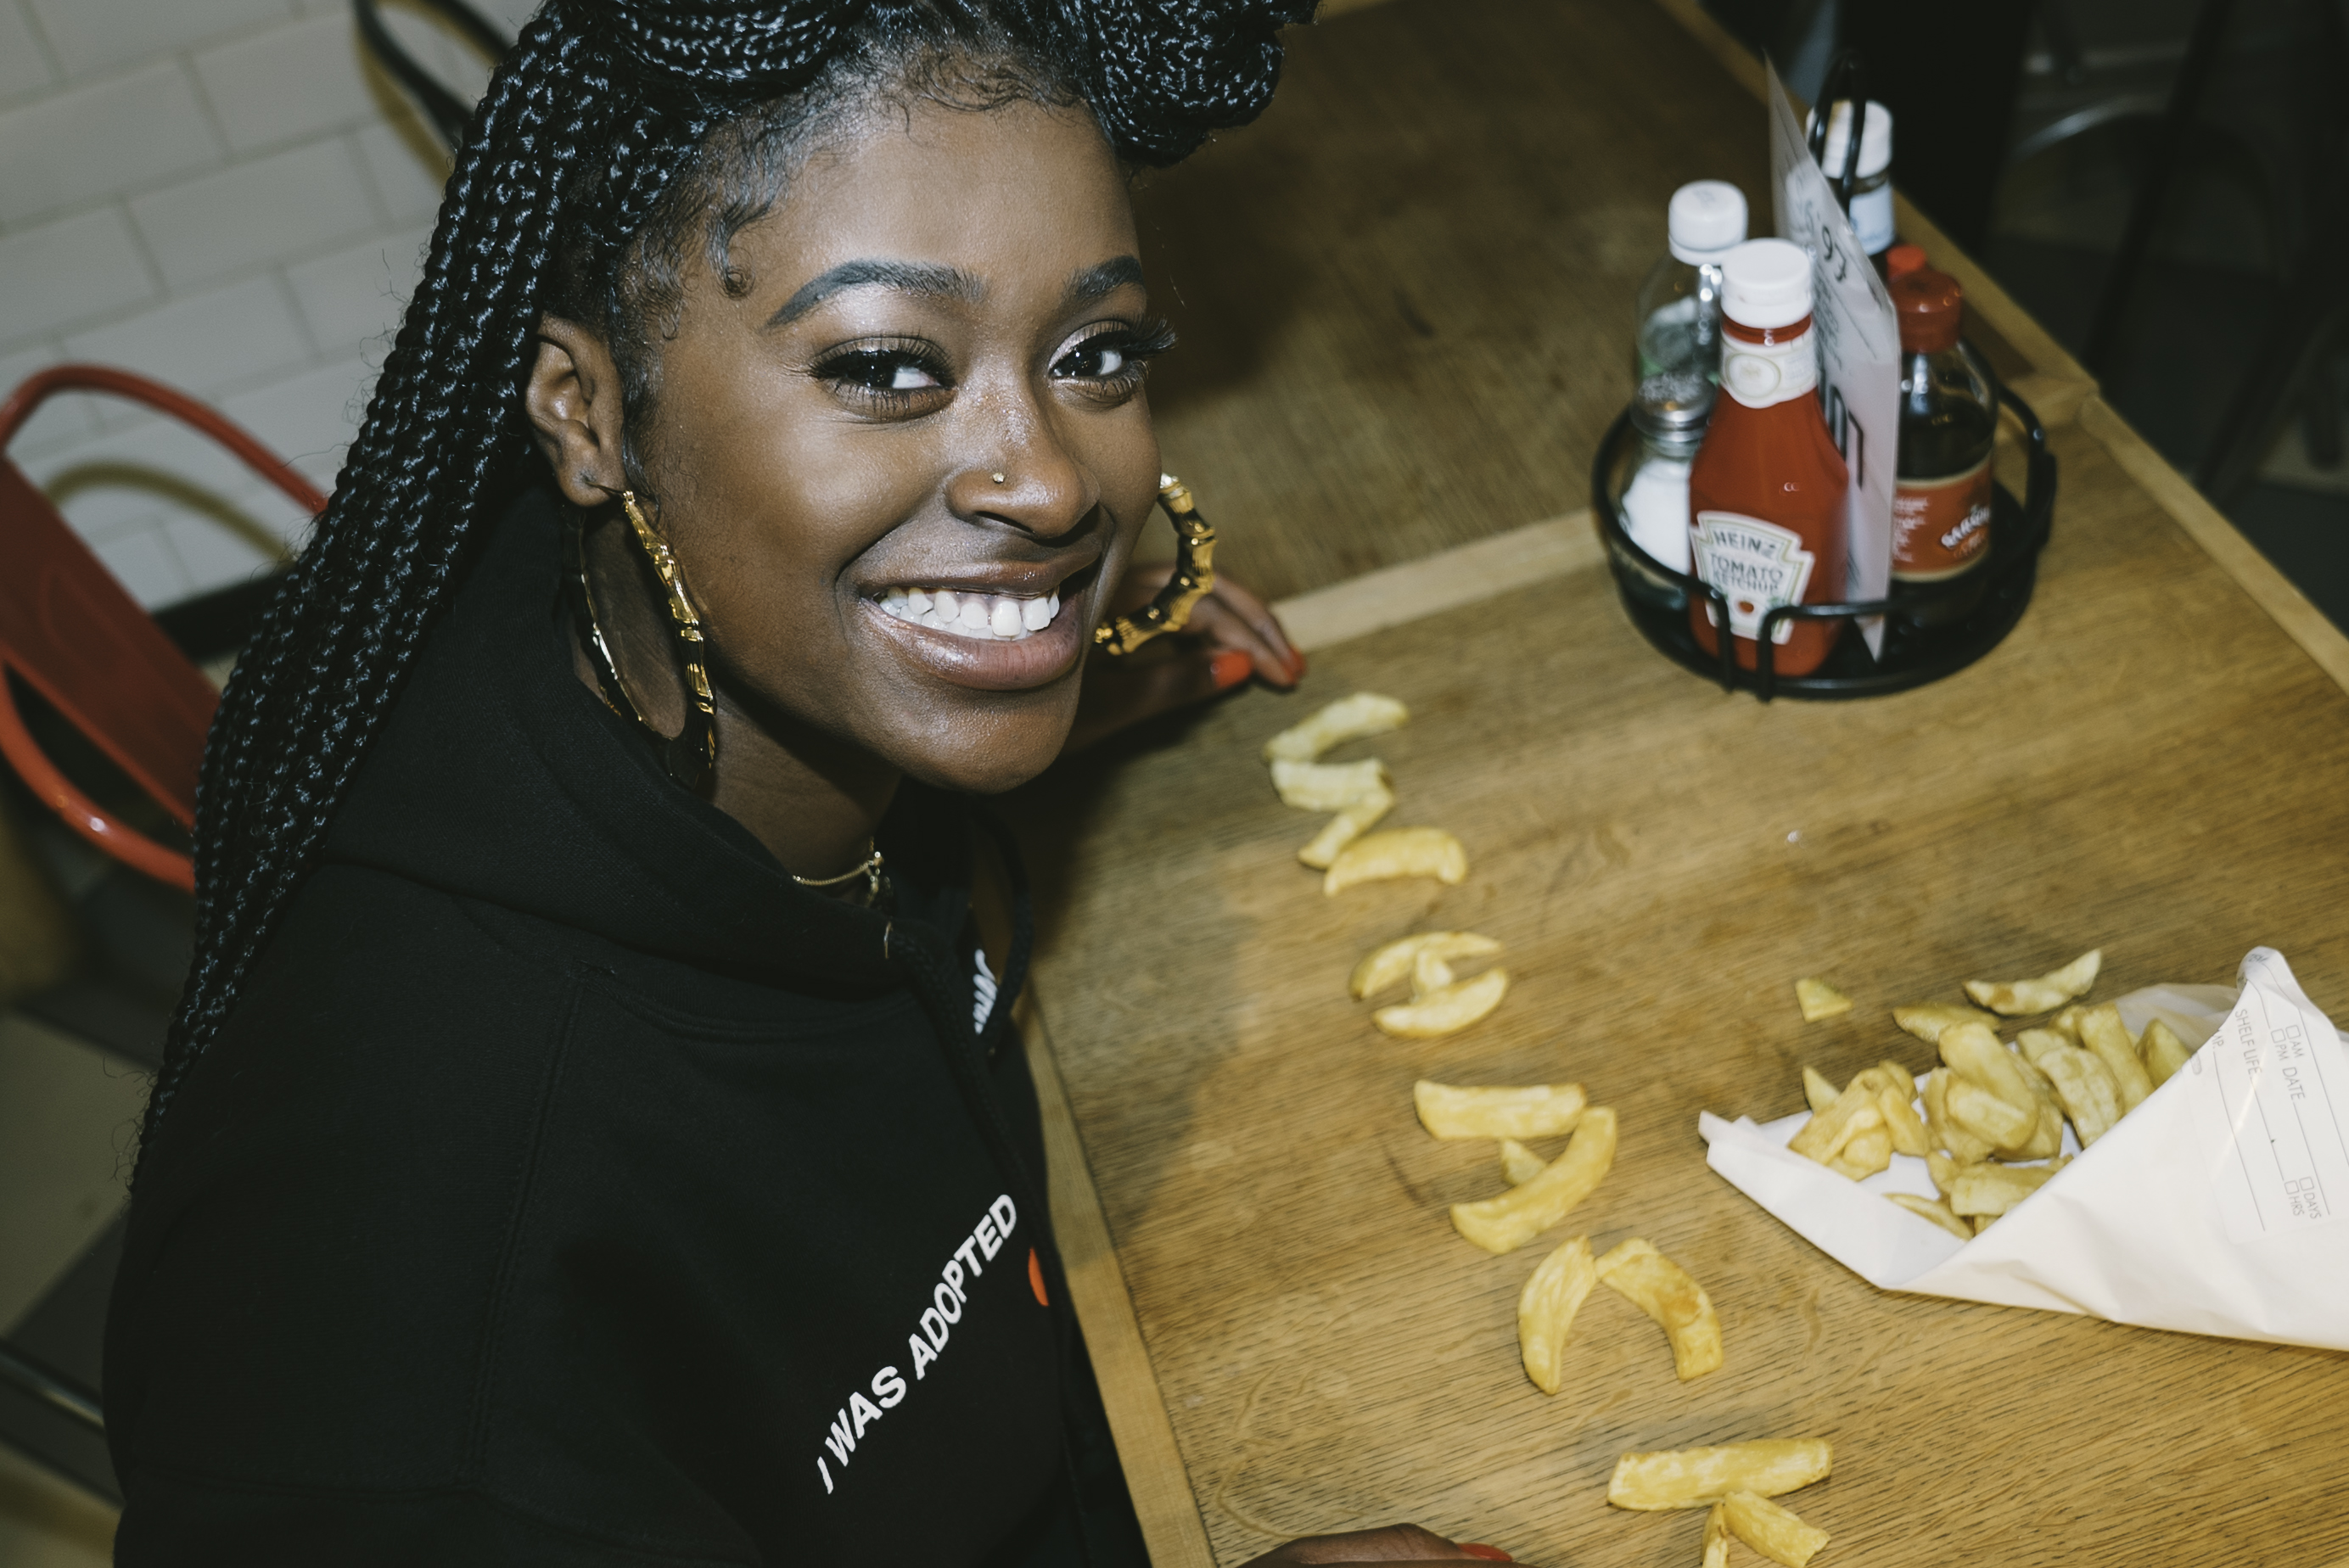 In her own world: an interview with Tierra Whack